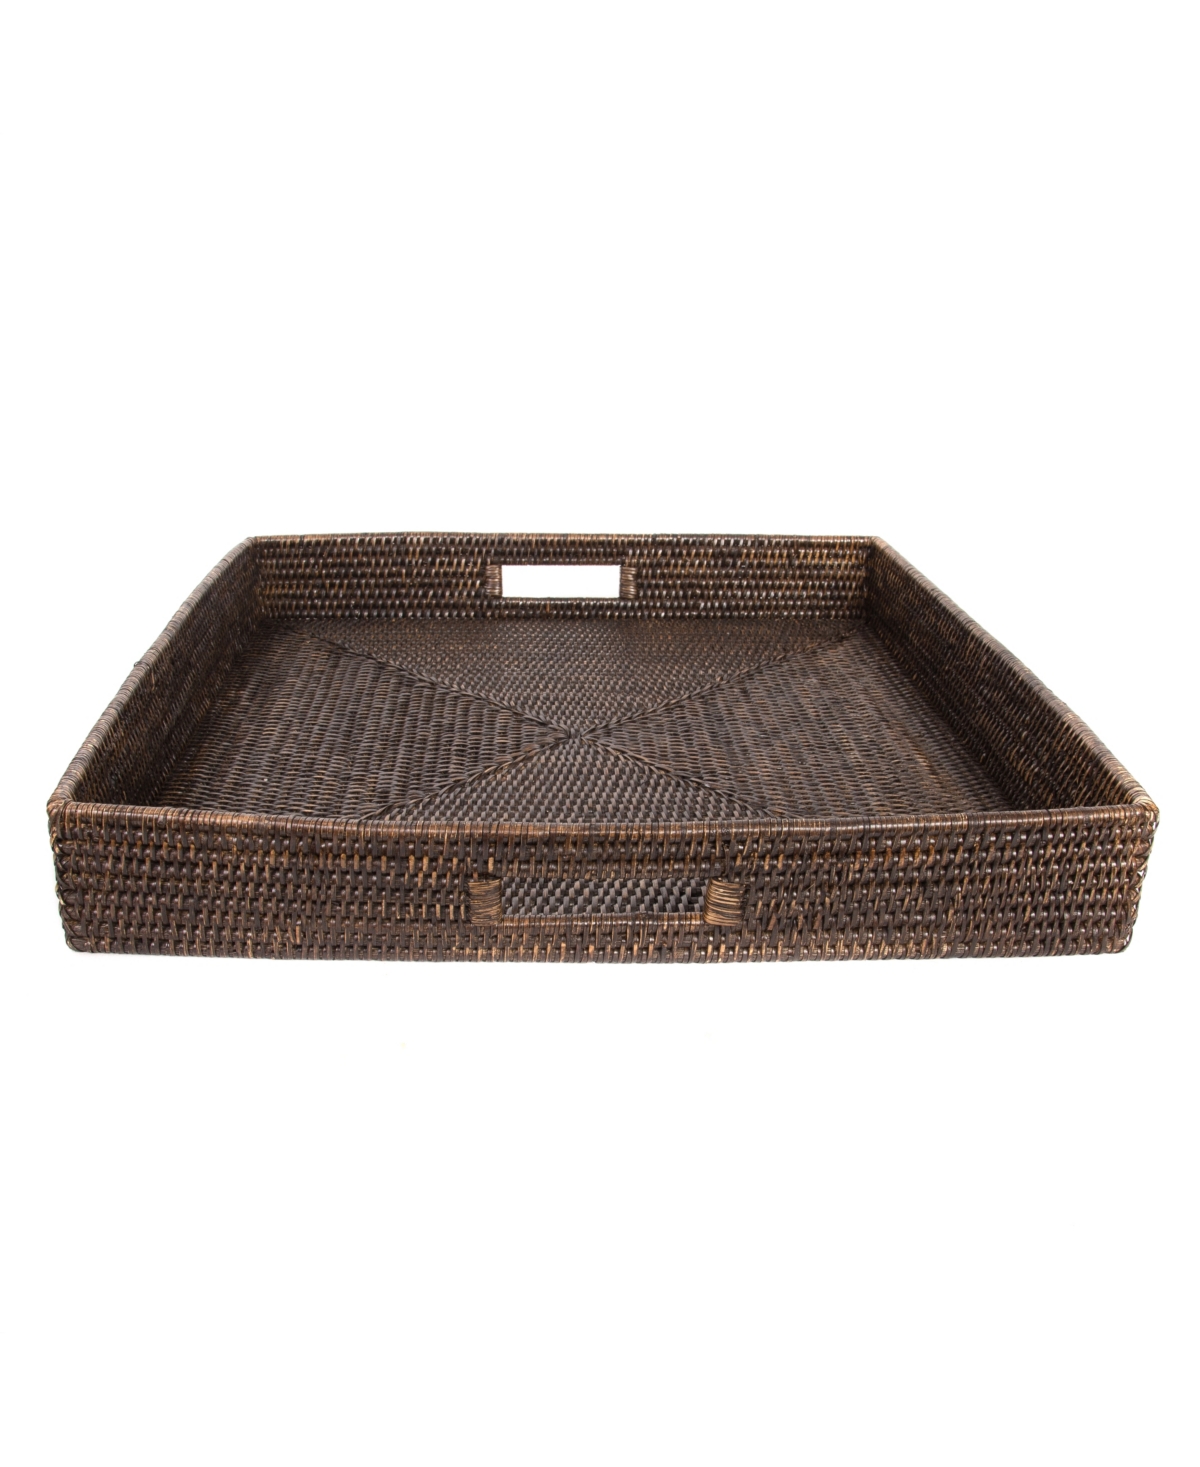 Artifacts Trading Company Artifacts Rattan Square Ottoman Tray In Coffee Bean